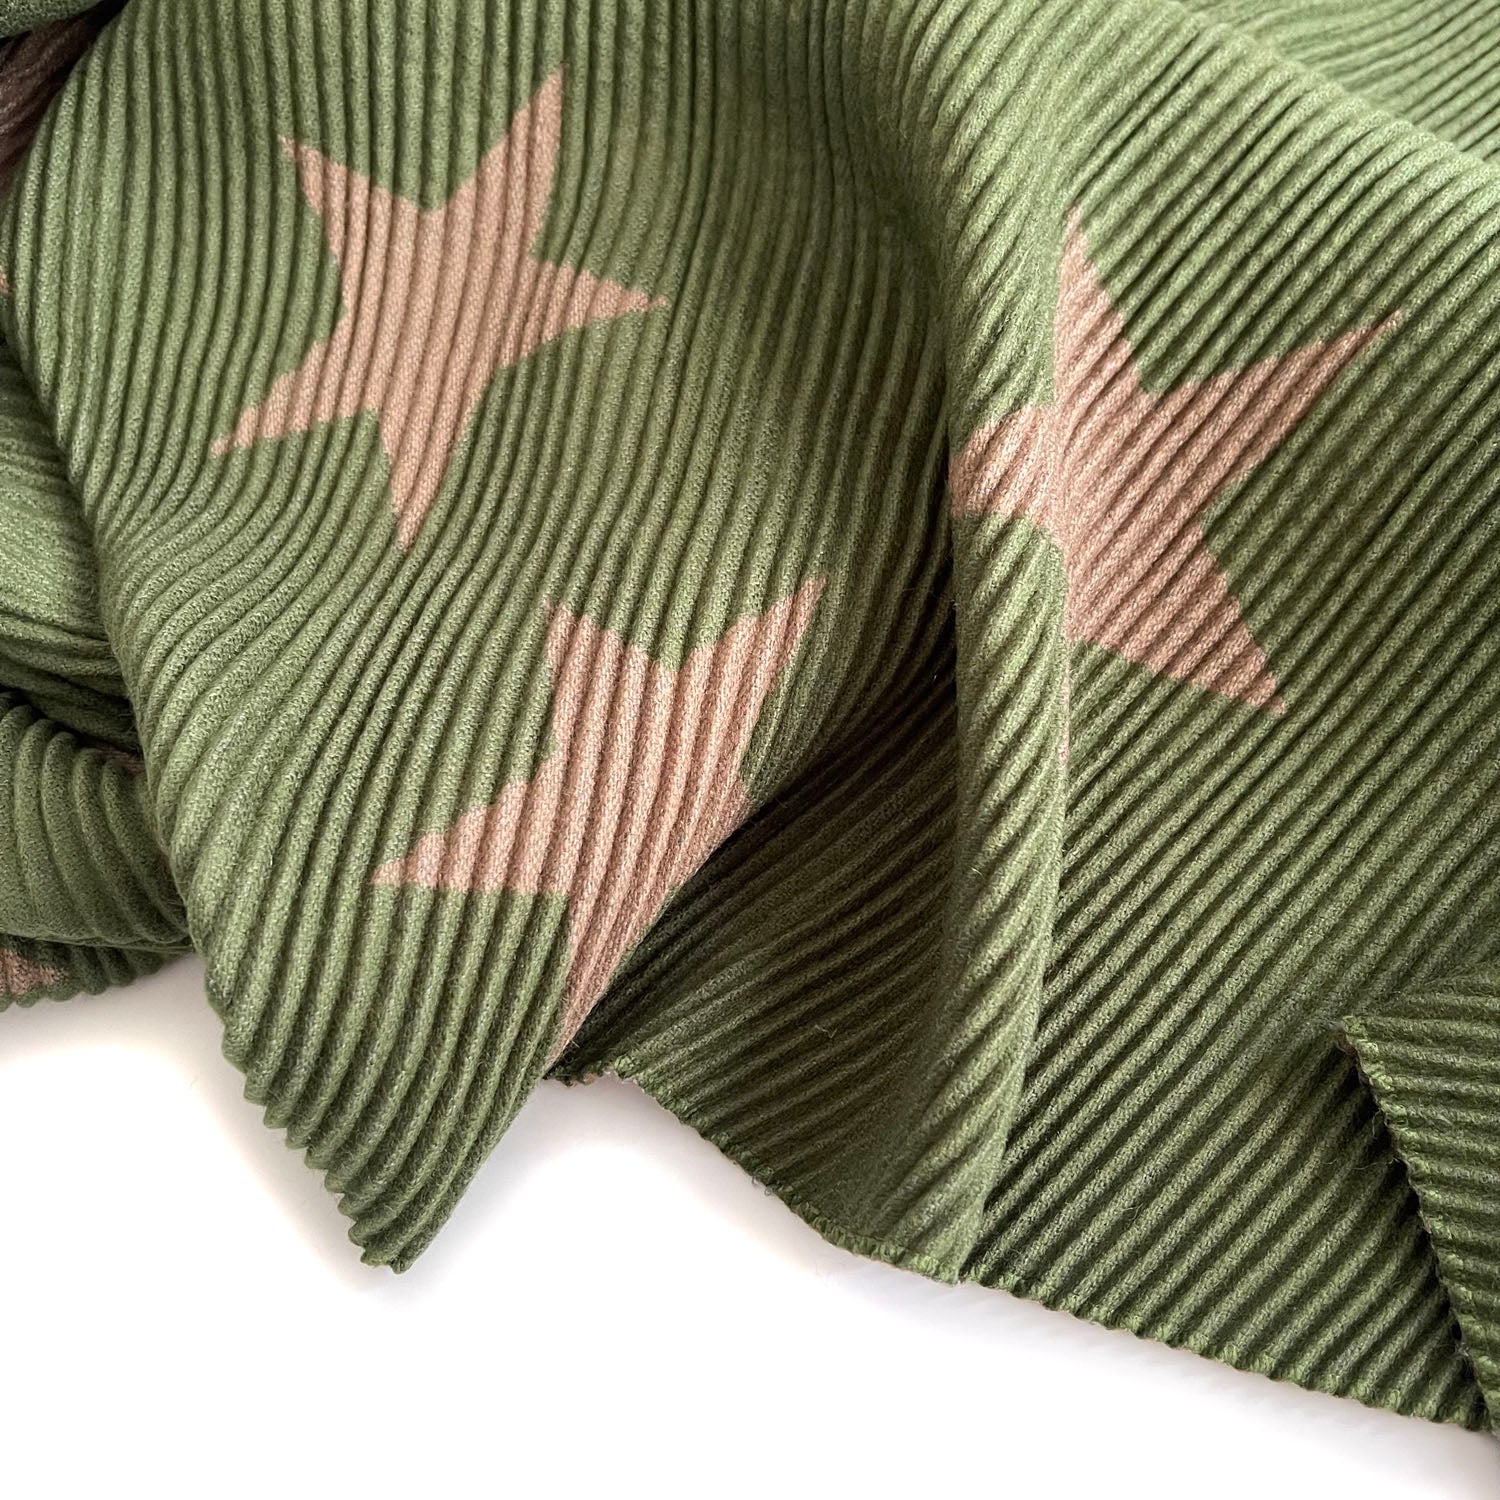 LARGE GREEN STAR THICK REVERSIBLE WINTER SHAWL BLANKET SCARF